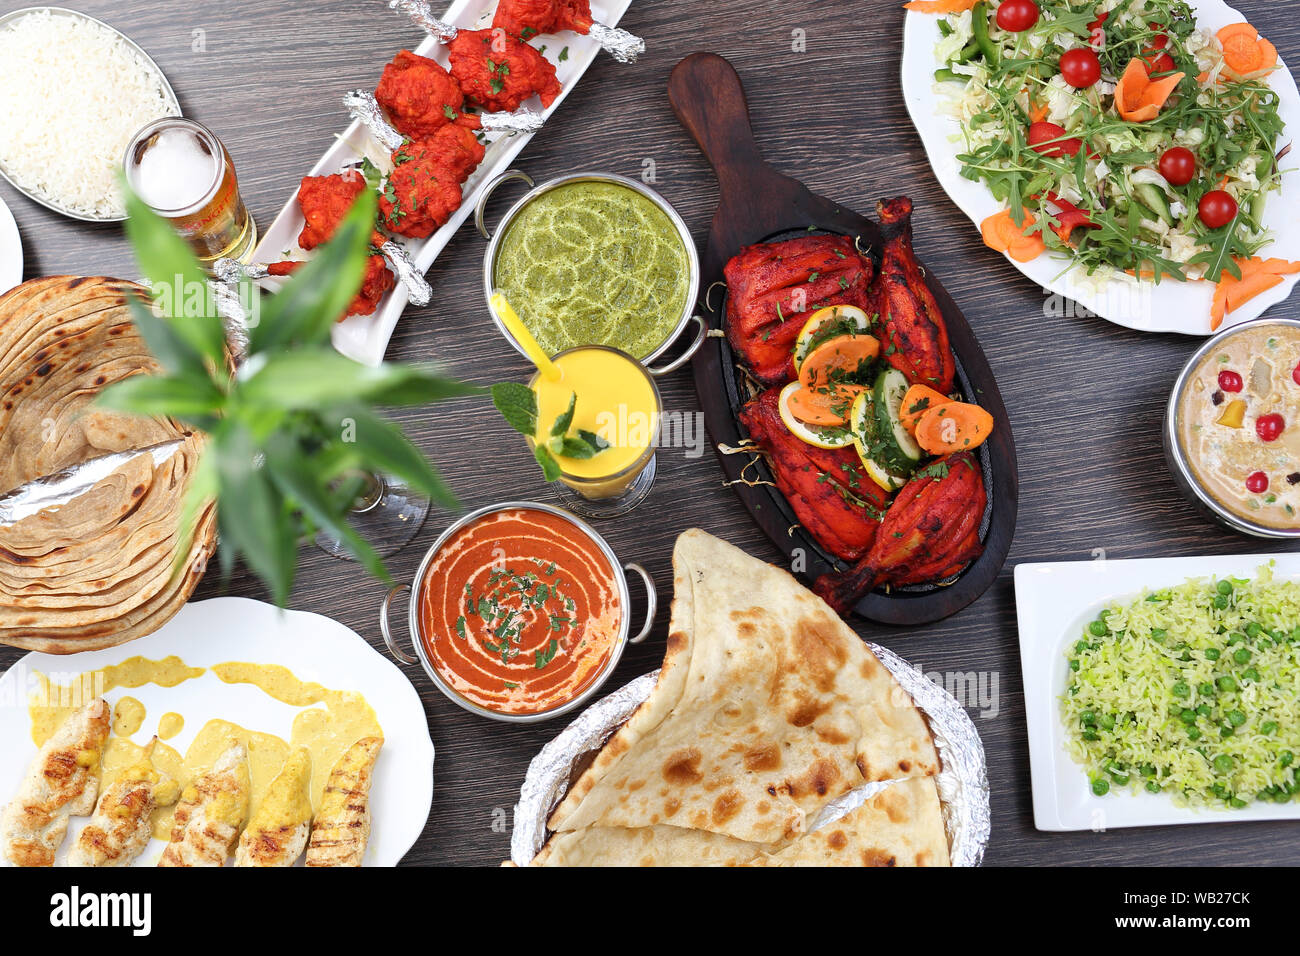 Indian food. Traditional Indian cuisine. Stock Photo